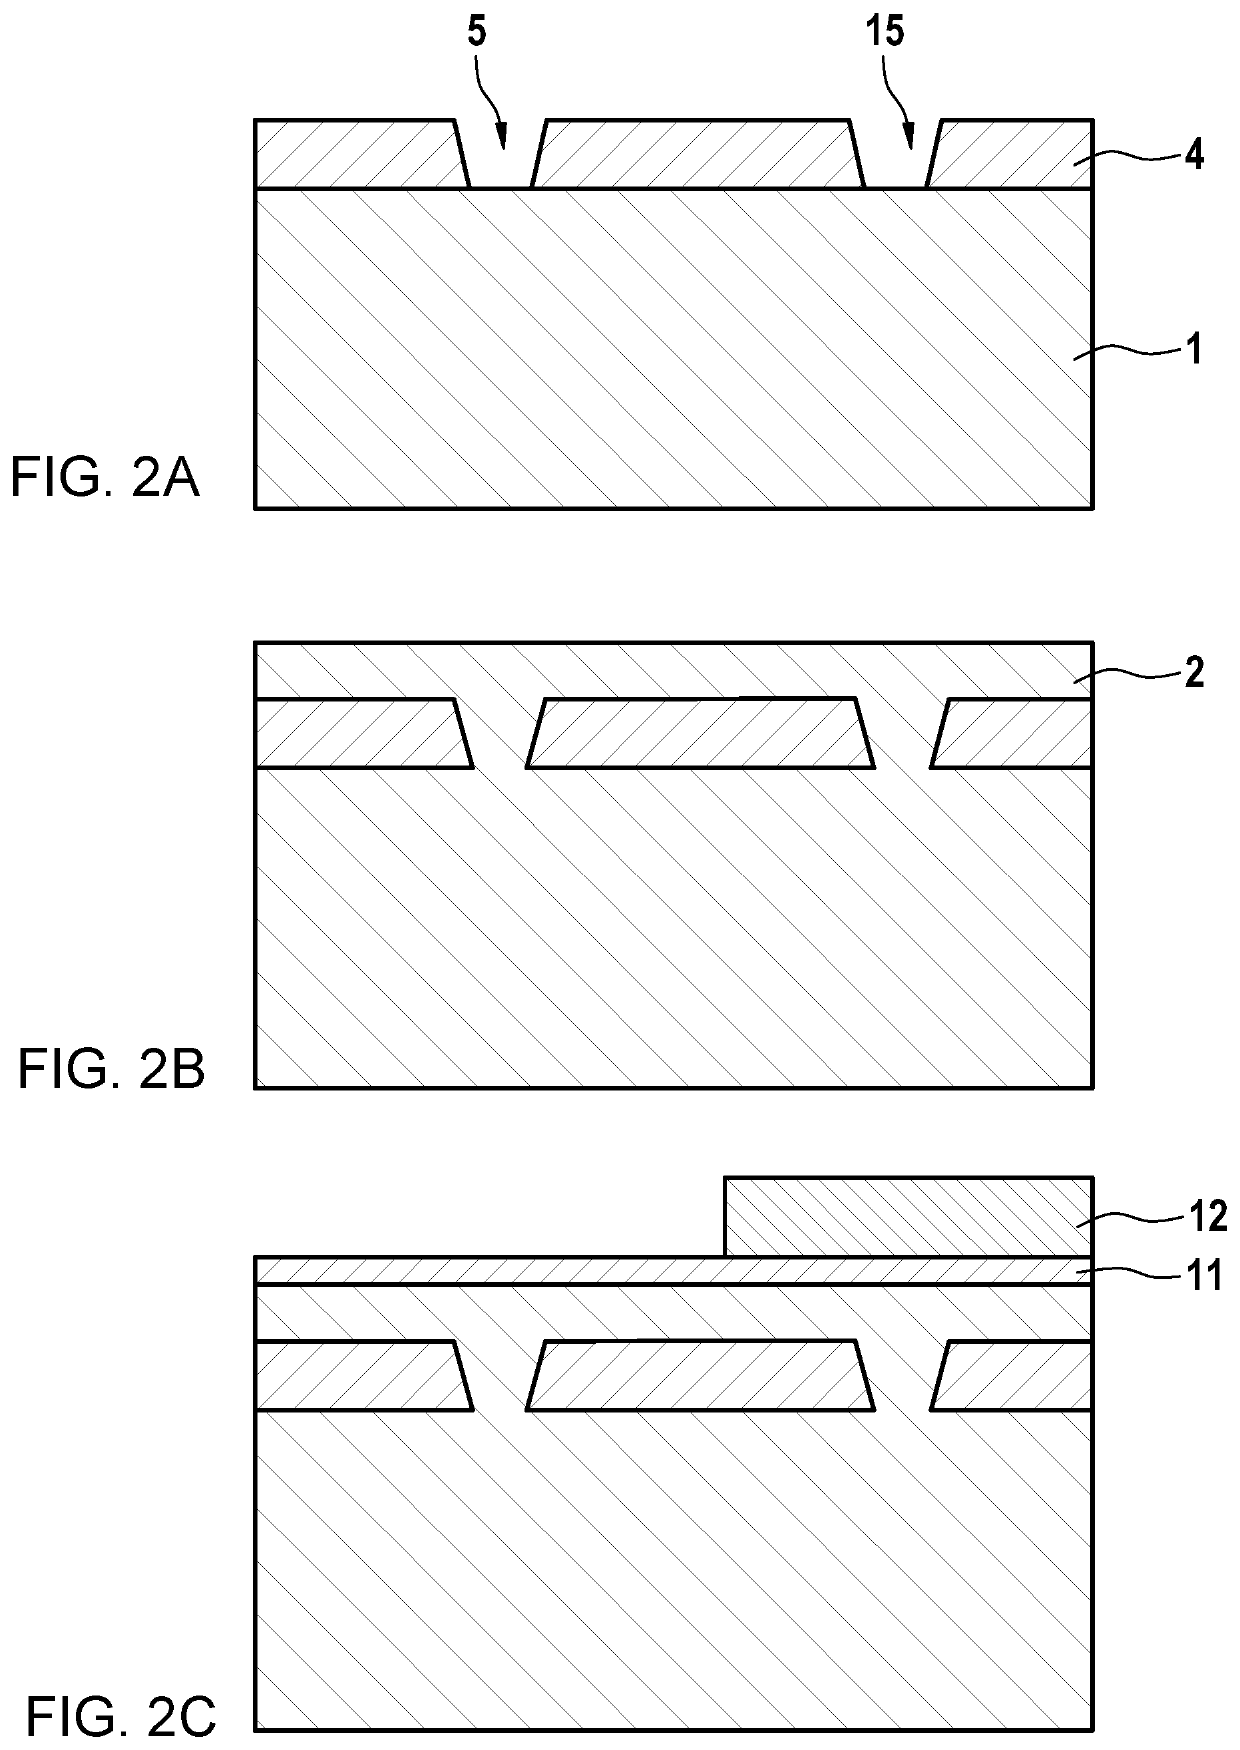 Method for forming a trench in a first semiconductor layer of a multi-layer system